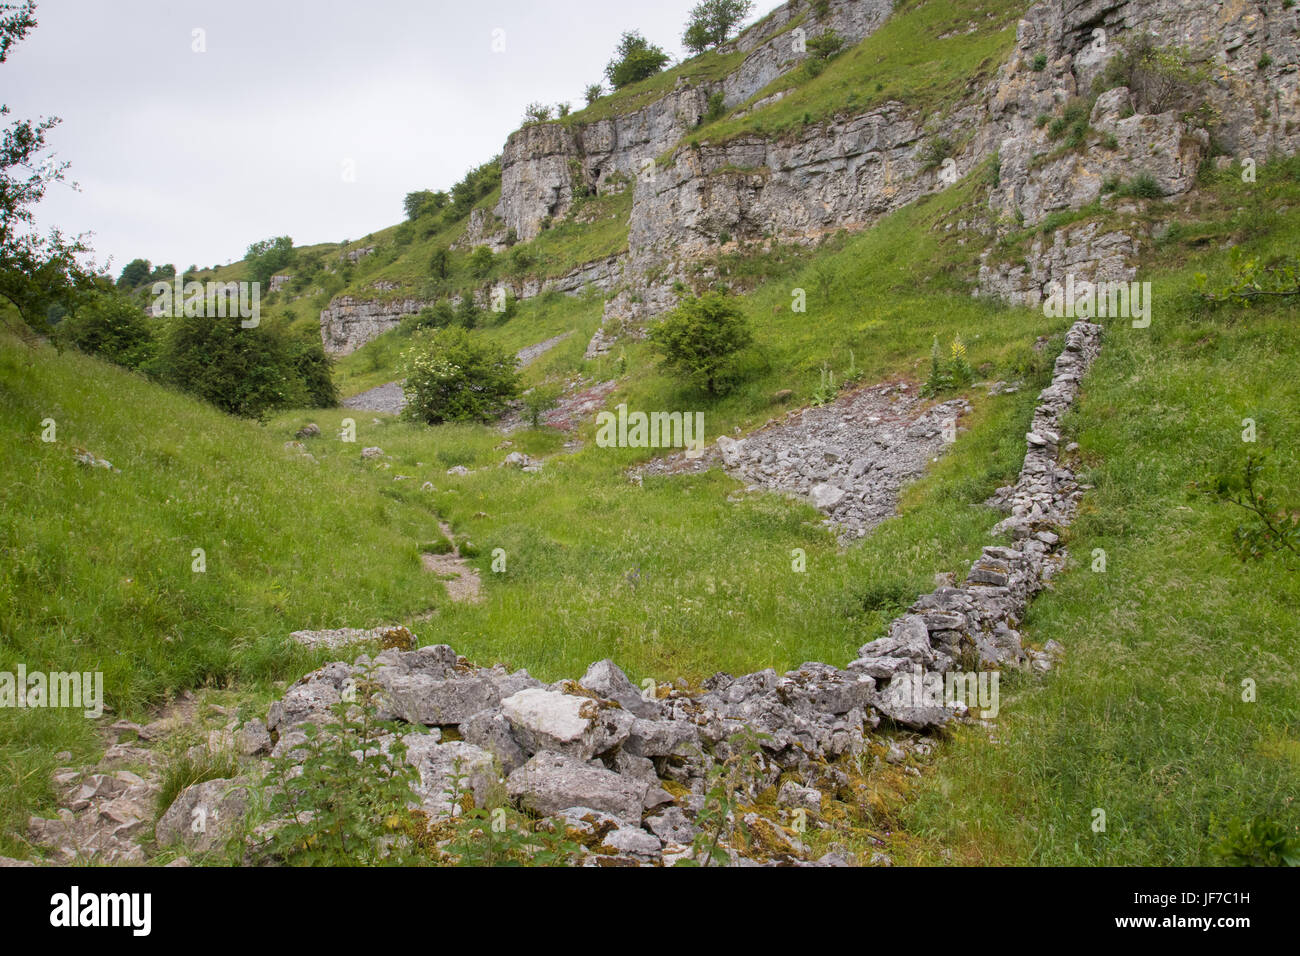 Drystone wall in a limestone valley, Lathkill Dale, Peak District National Park, UK Stock Photo